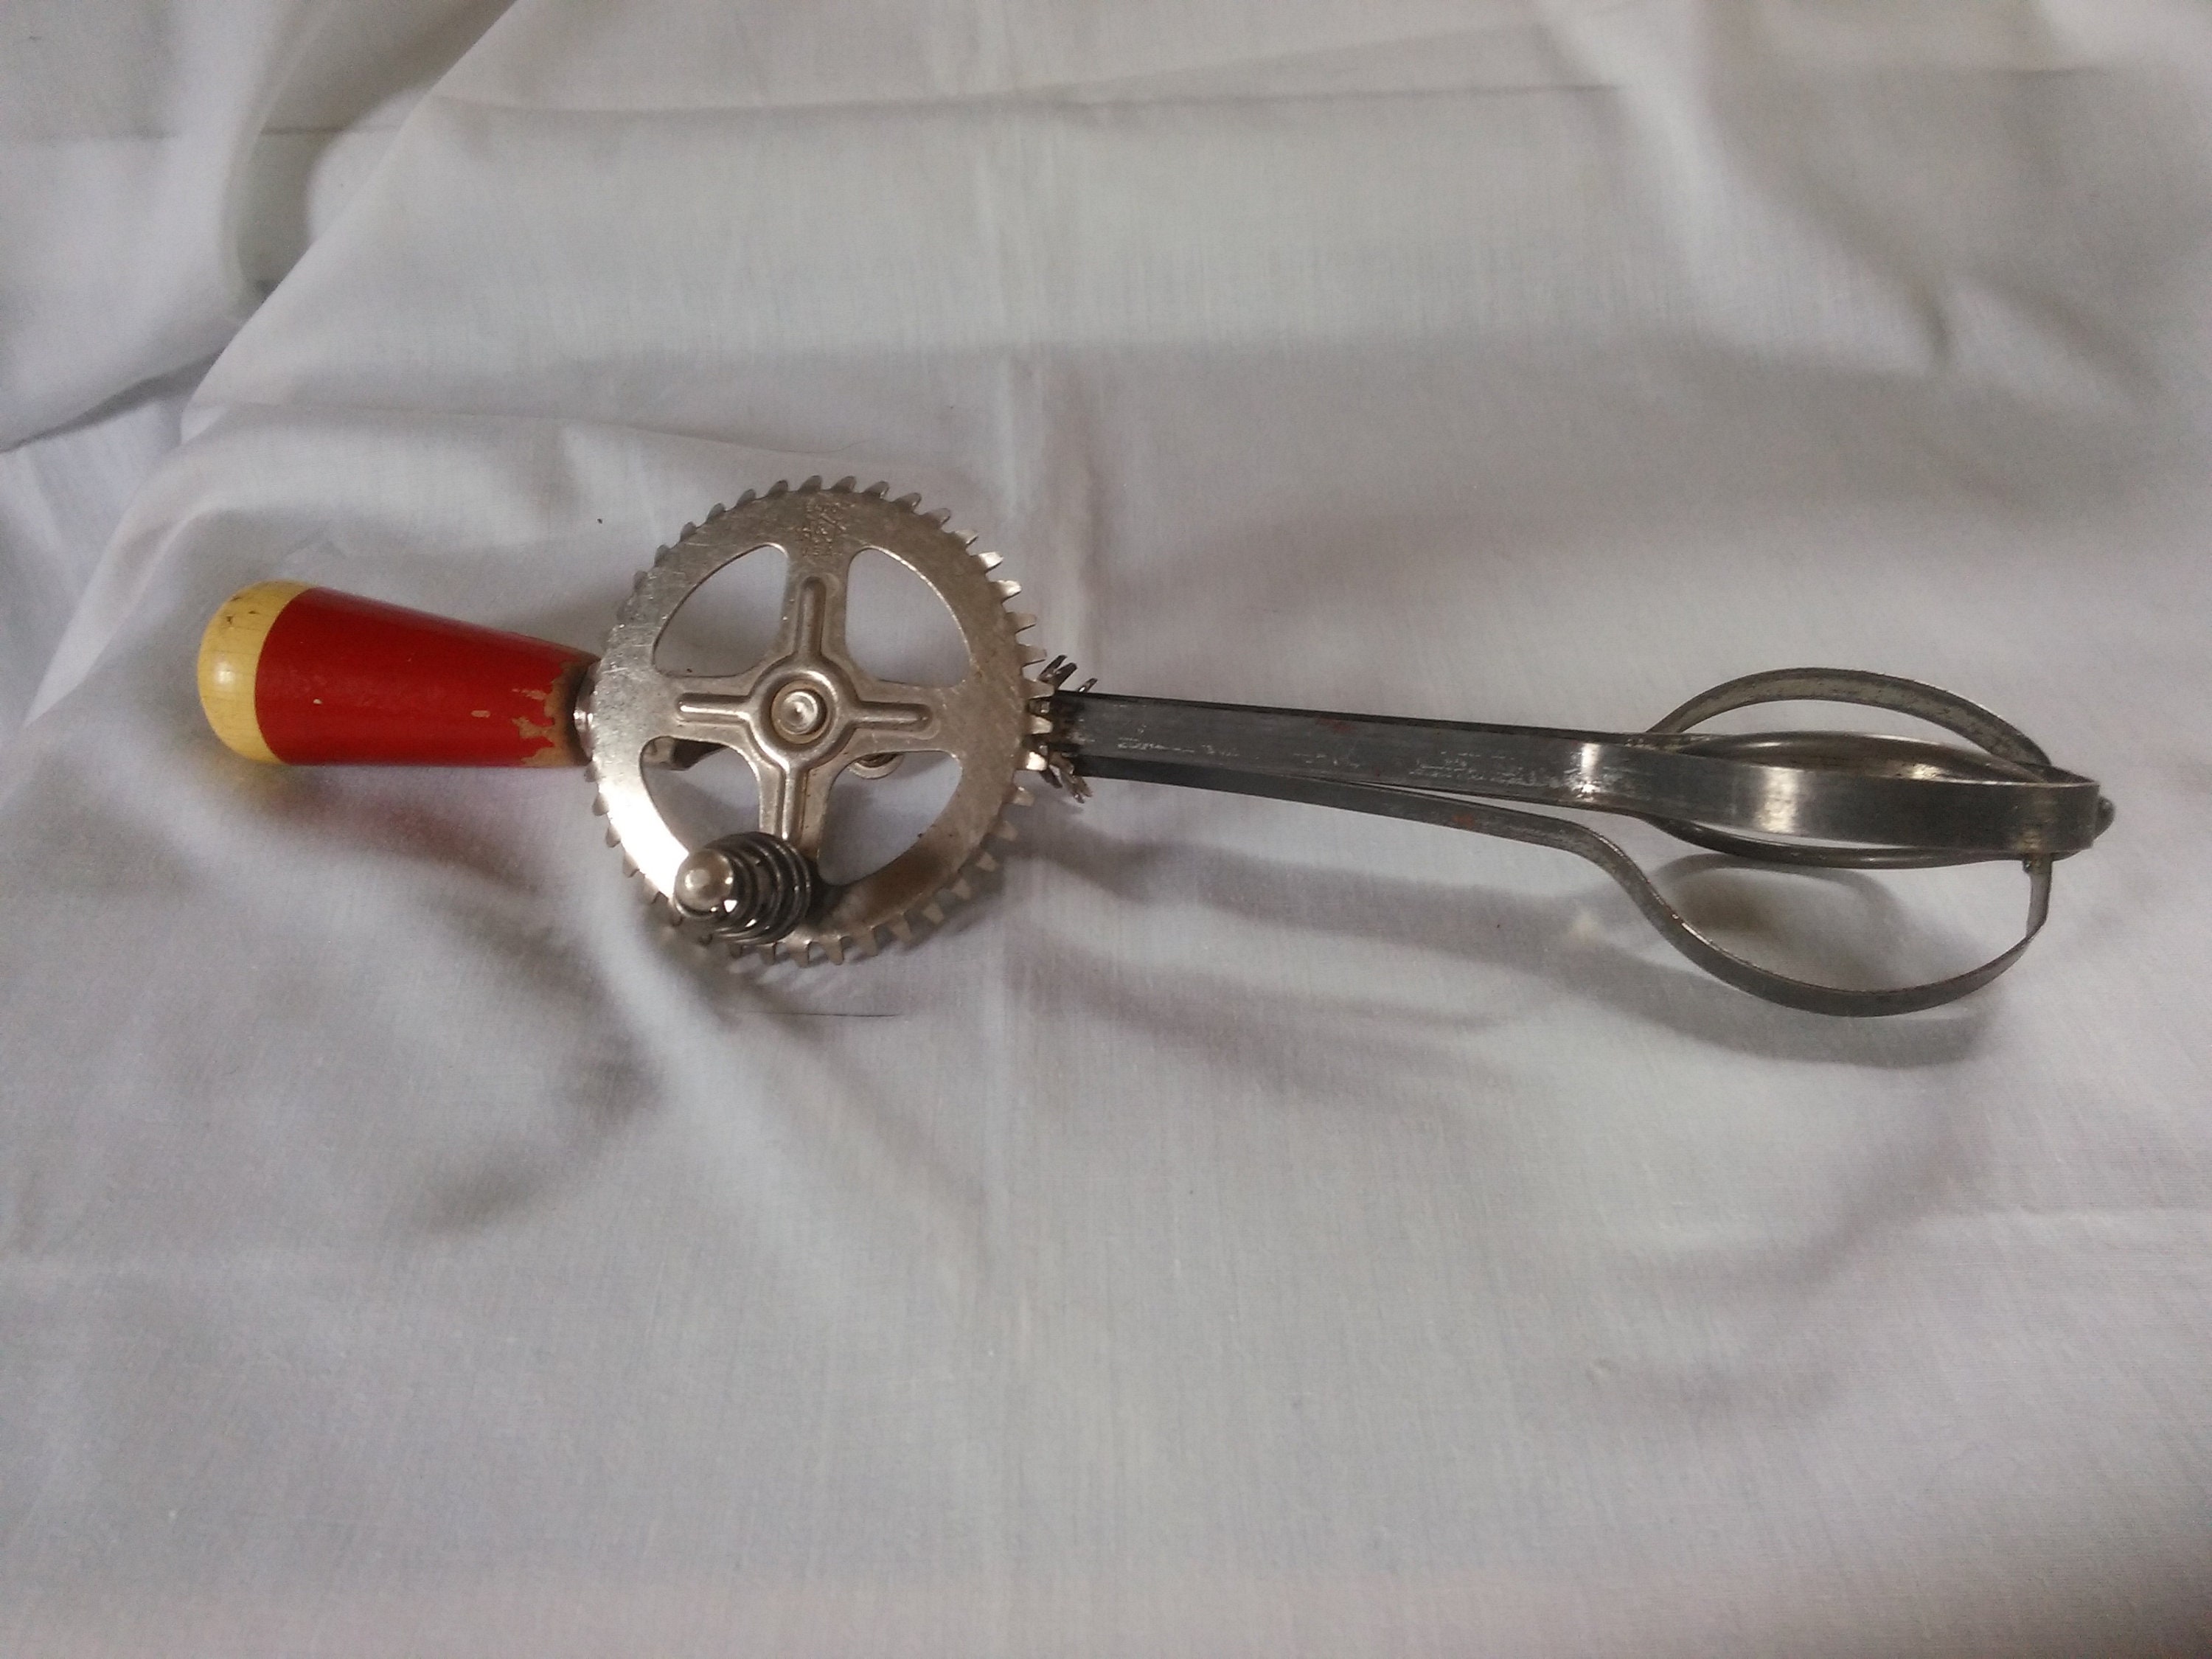 Whisk Spring Coil Red Plastic Handle Stainless Open End 6 Vintage Mid  Century